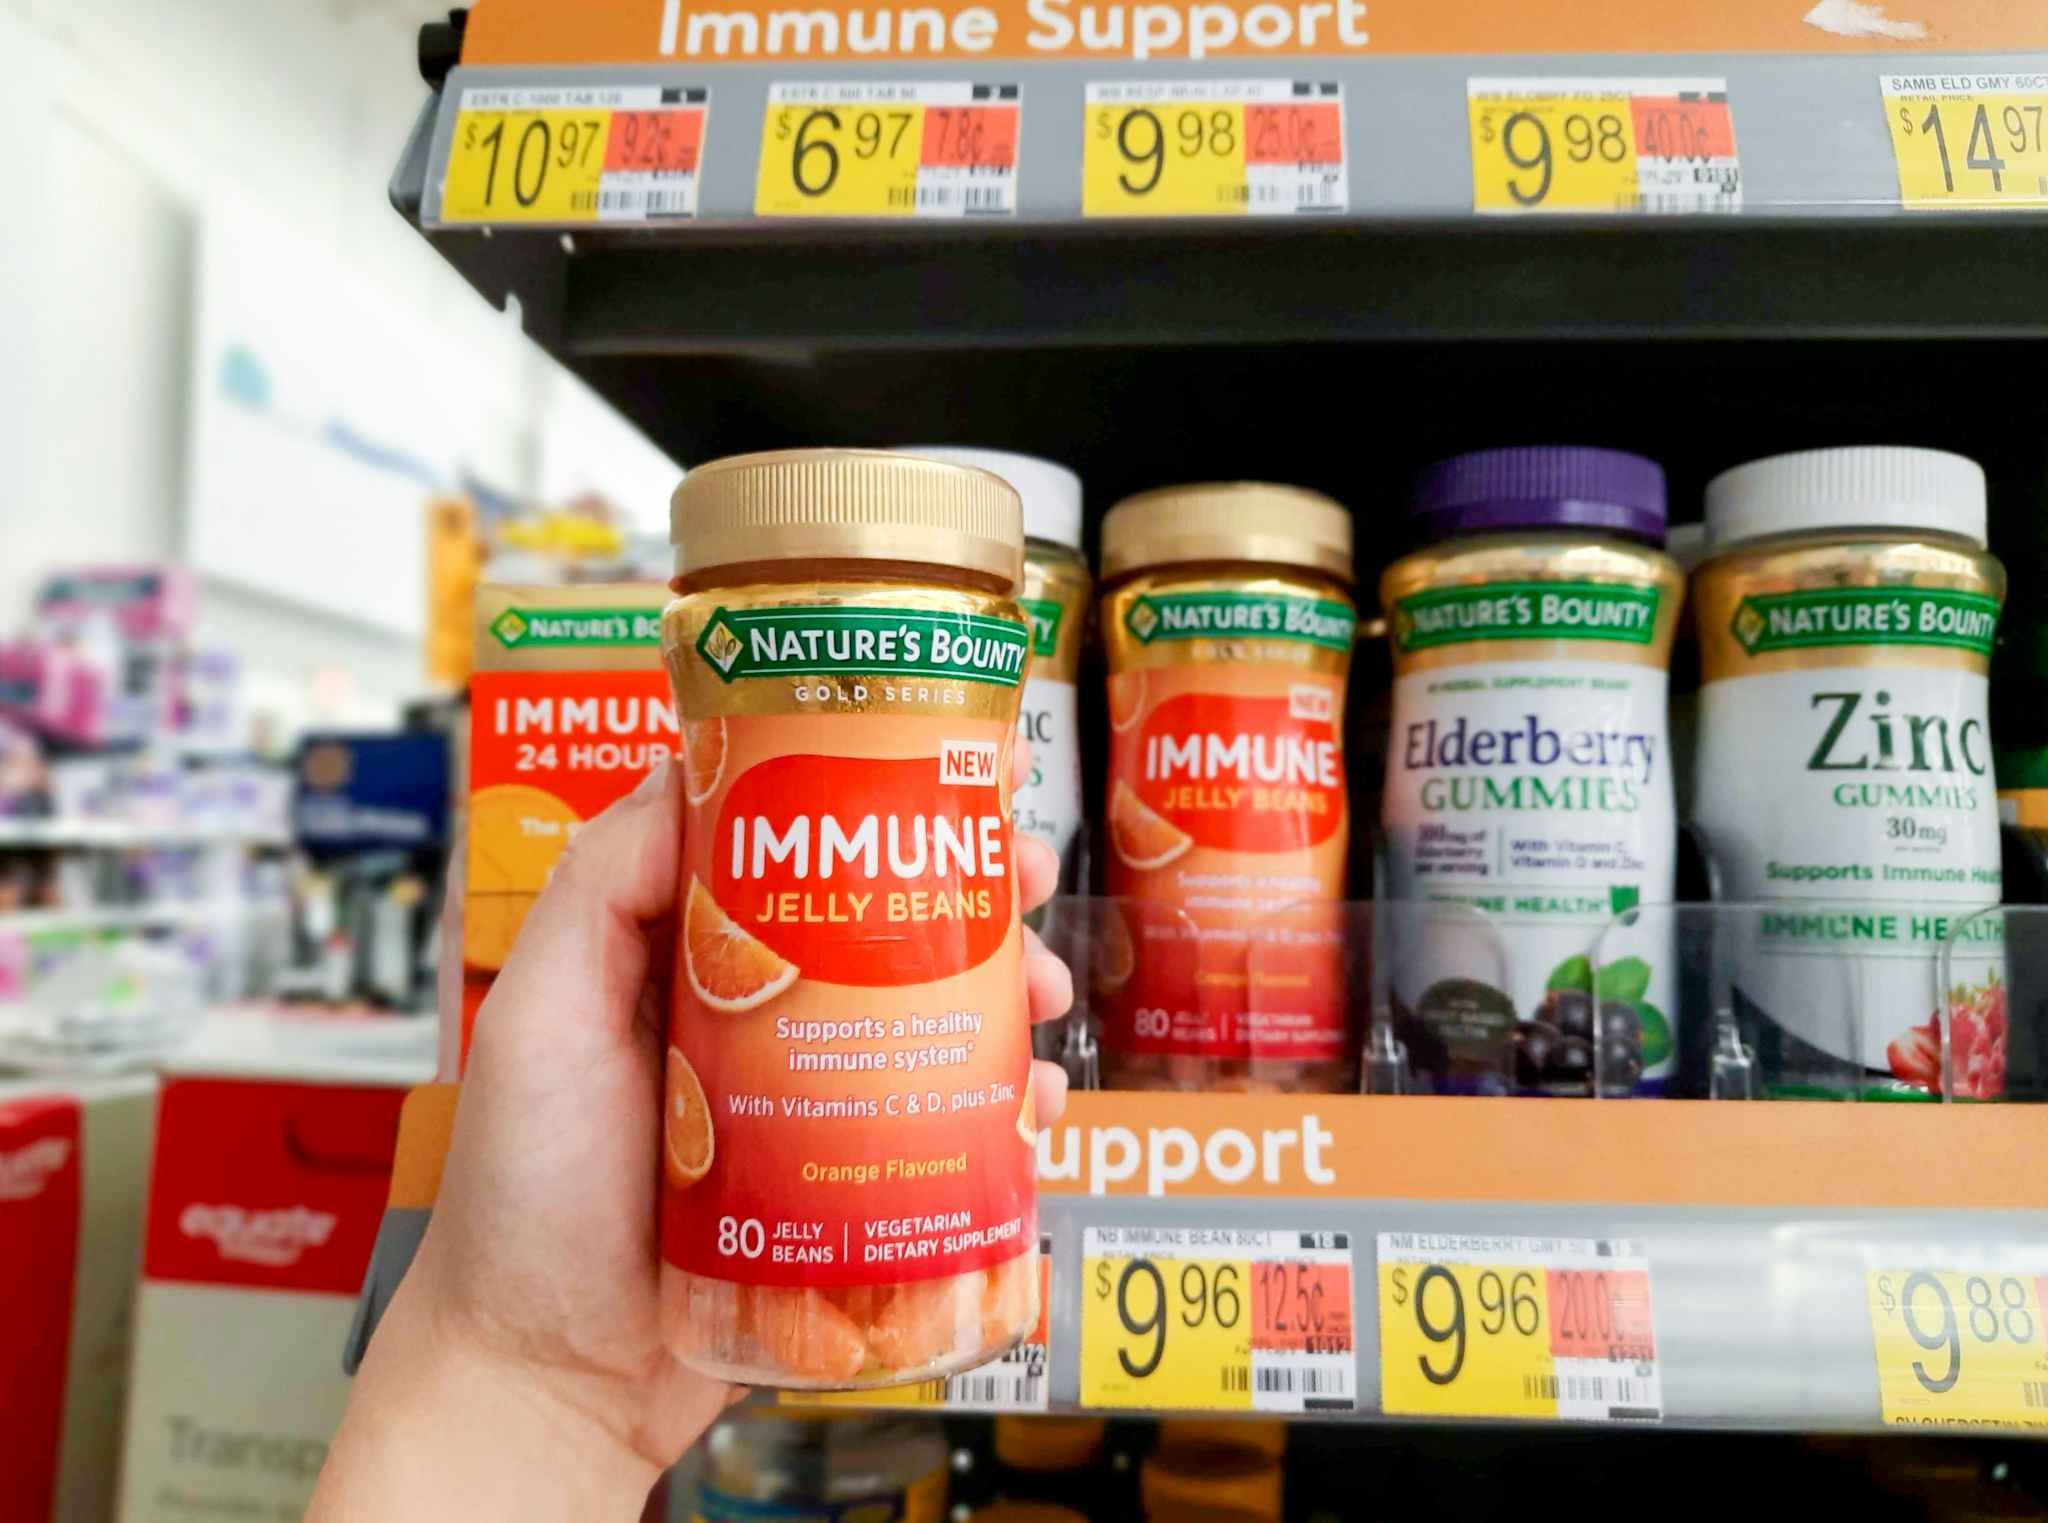 Nature's Bounty Immune Jelly Bean Vitamins held in front of shelf and $9.96 price tag at Walmart